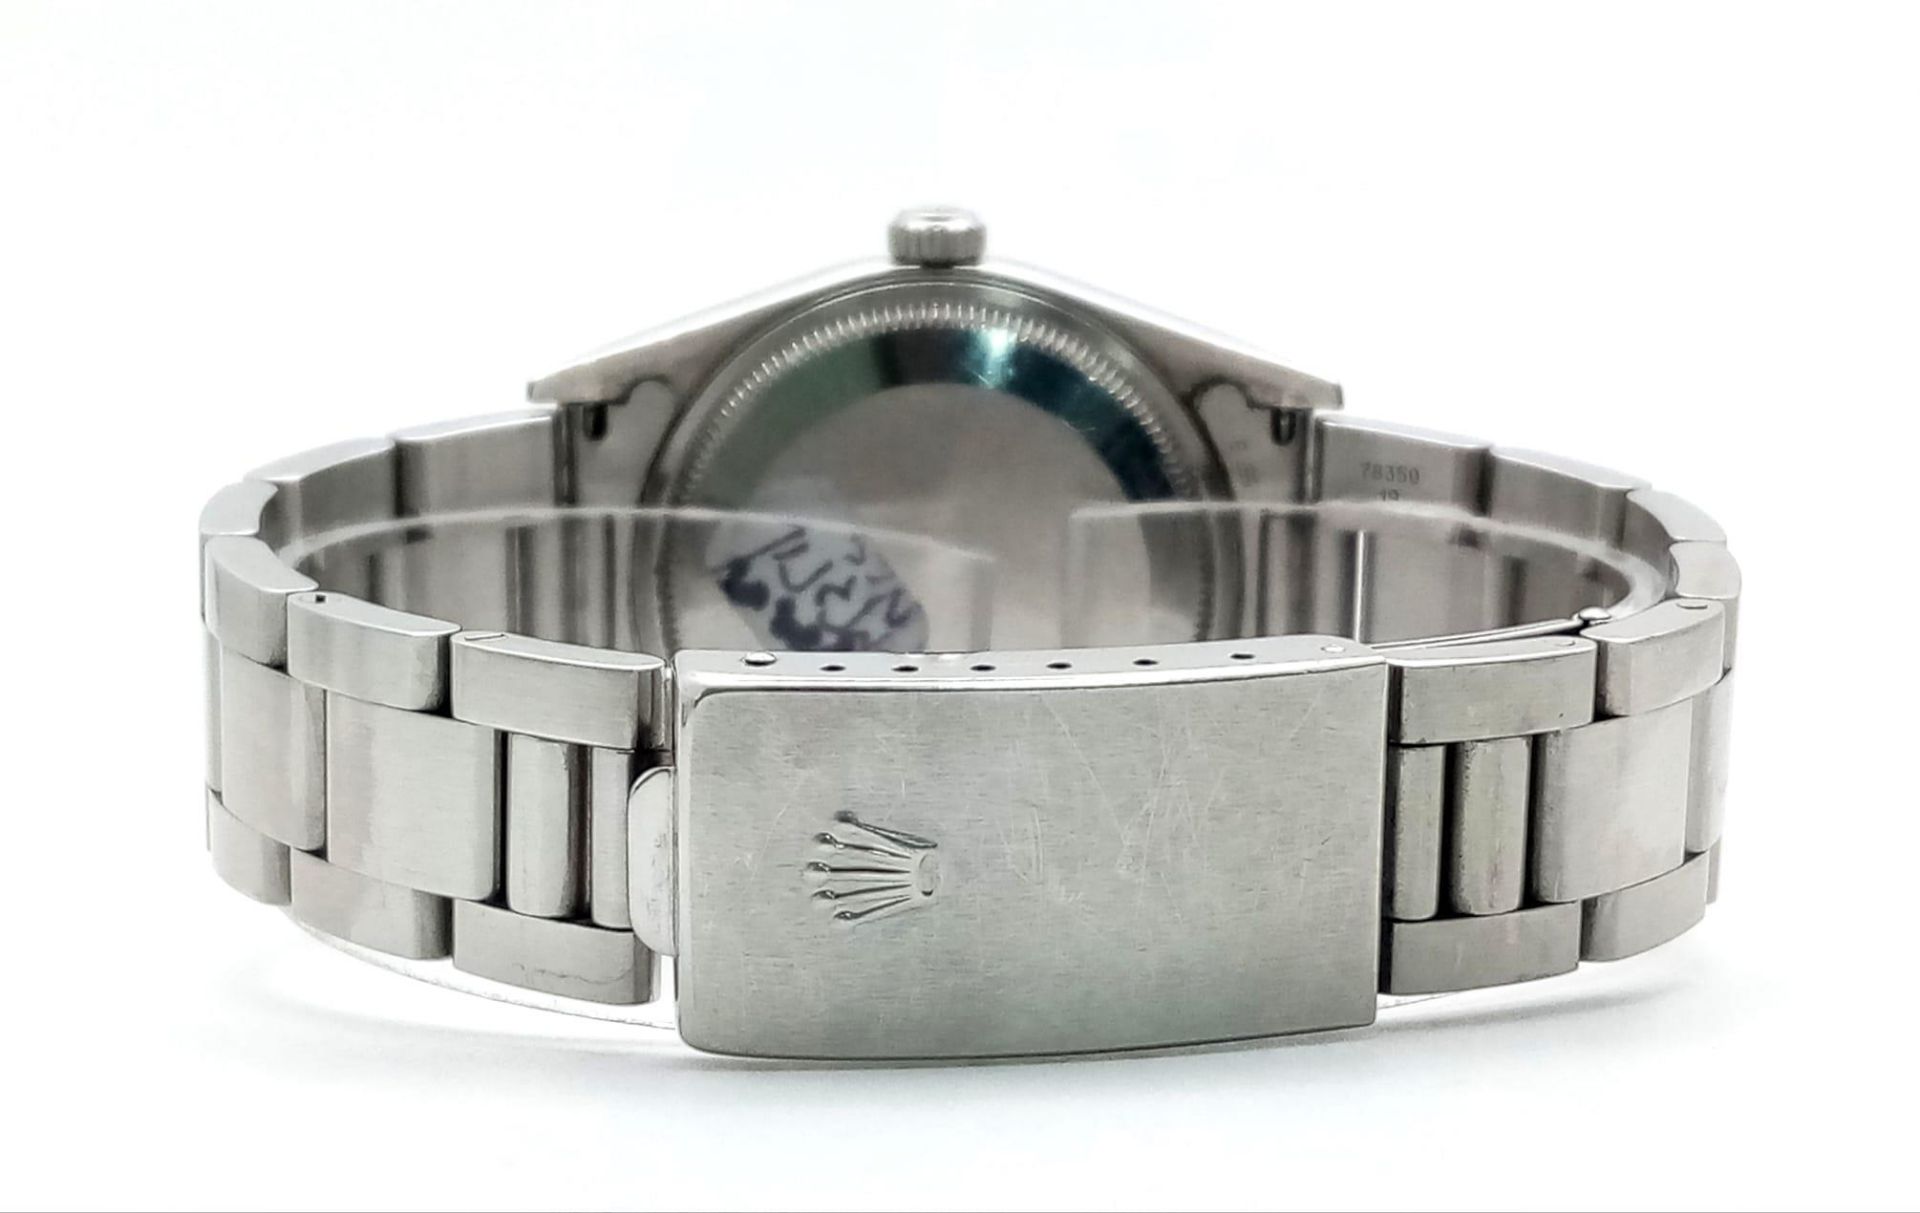 A Rolex Oyster Perpetual Datejust Gents Watch. Stainless steel bracelet and case - 35mm. Silver tone - Image 6 of 8